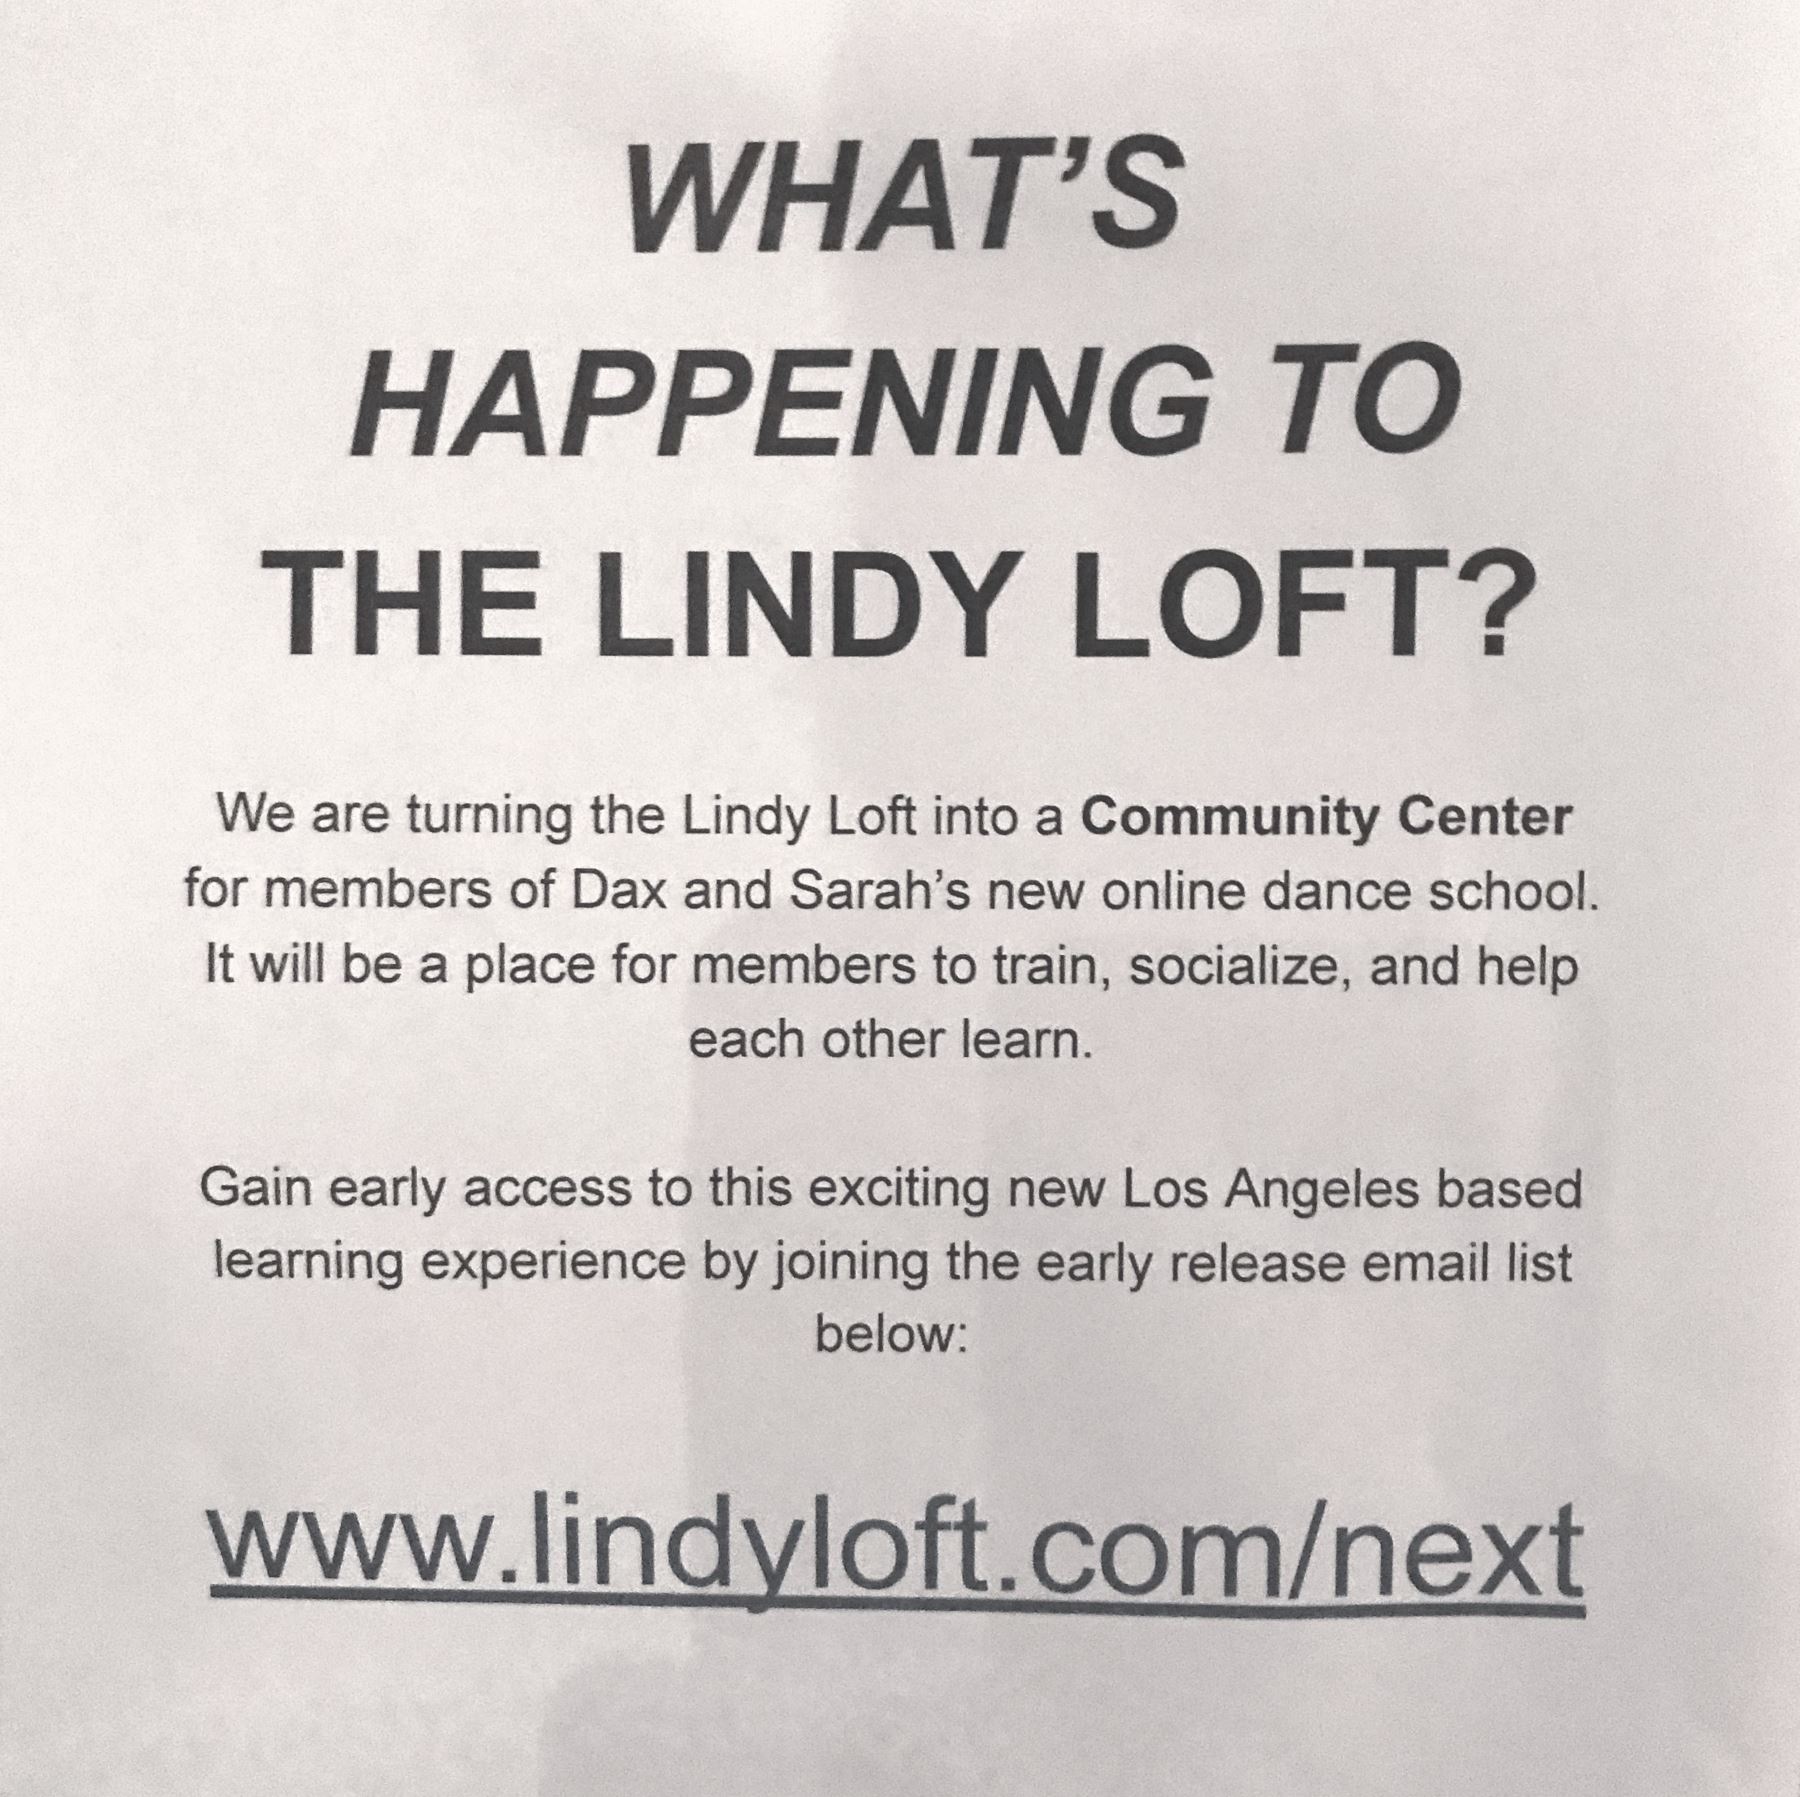 What's happening to the Lindy Loft?